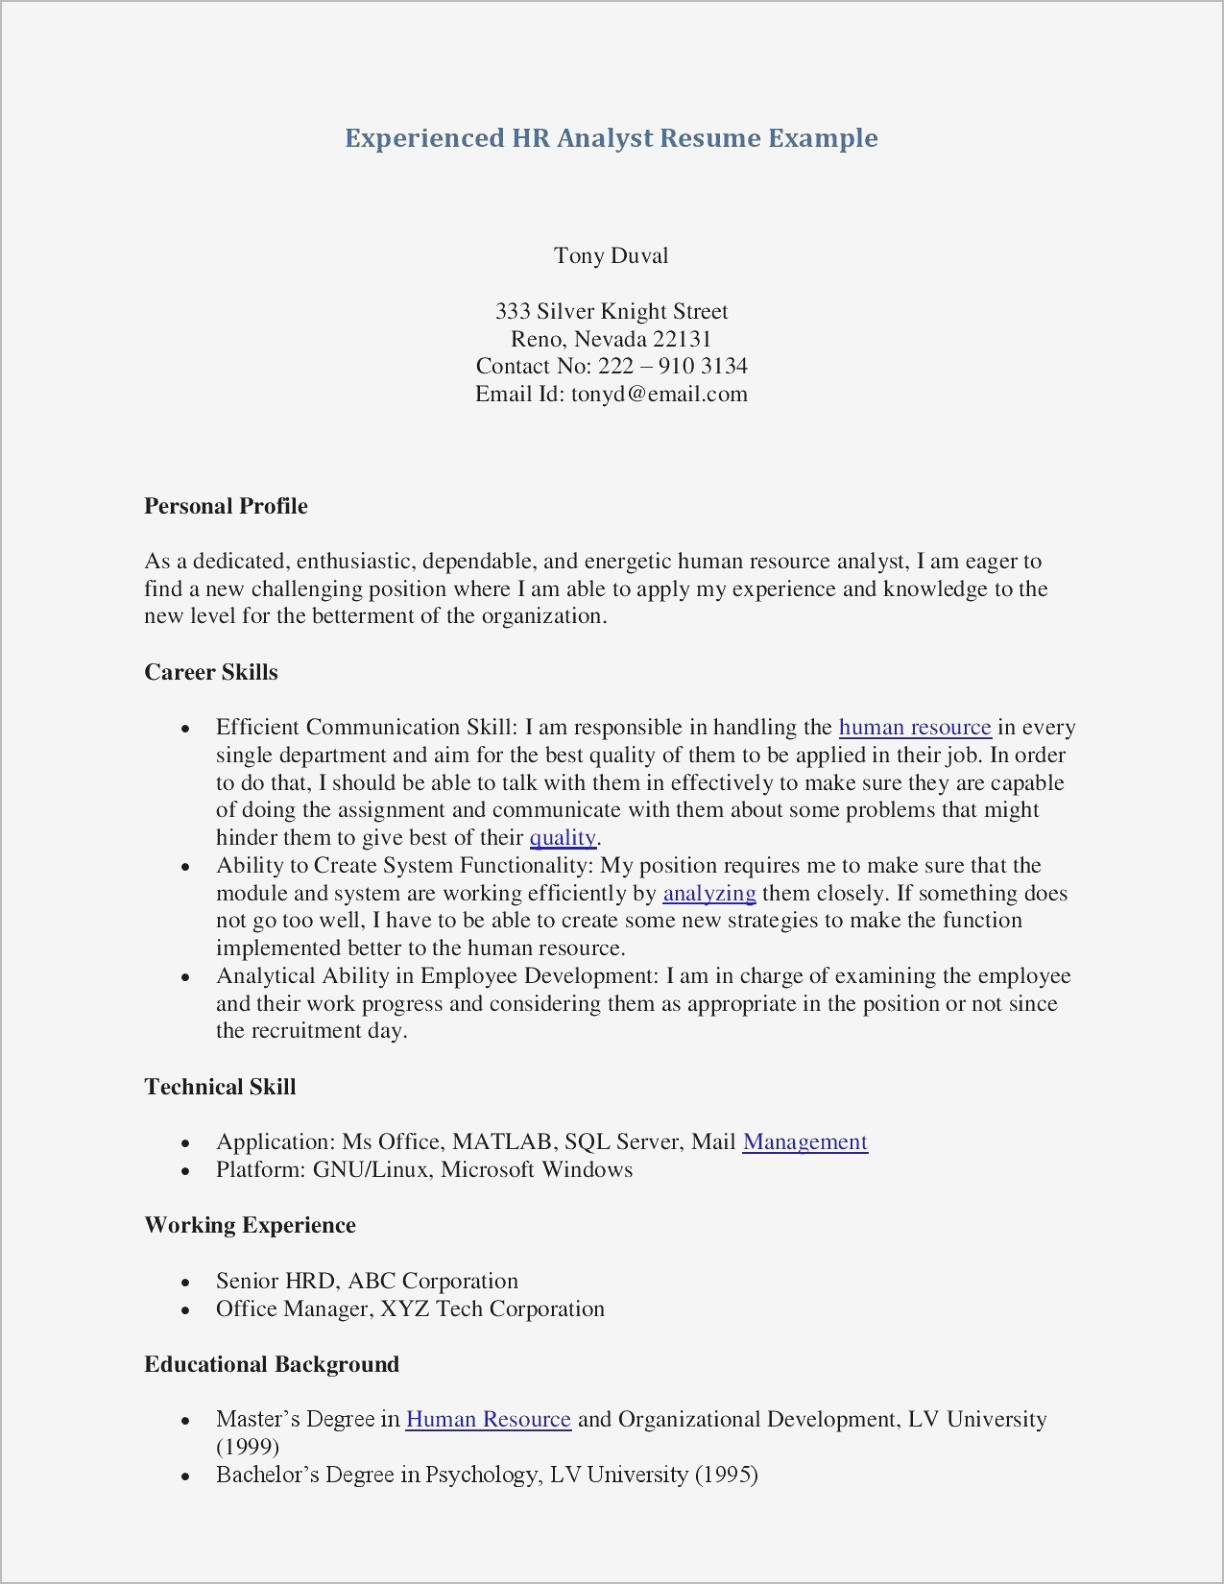 Resume Cover Letter Template Pdf - Cover Letter Free Template Pdf format